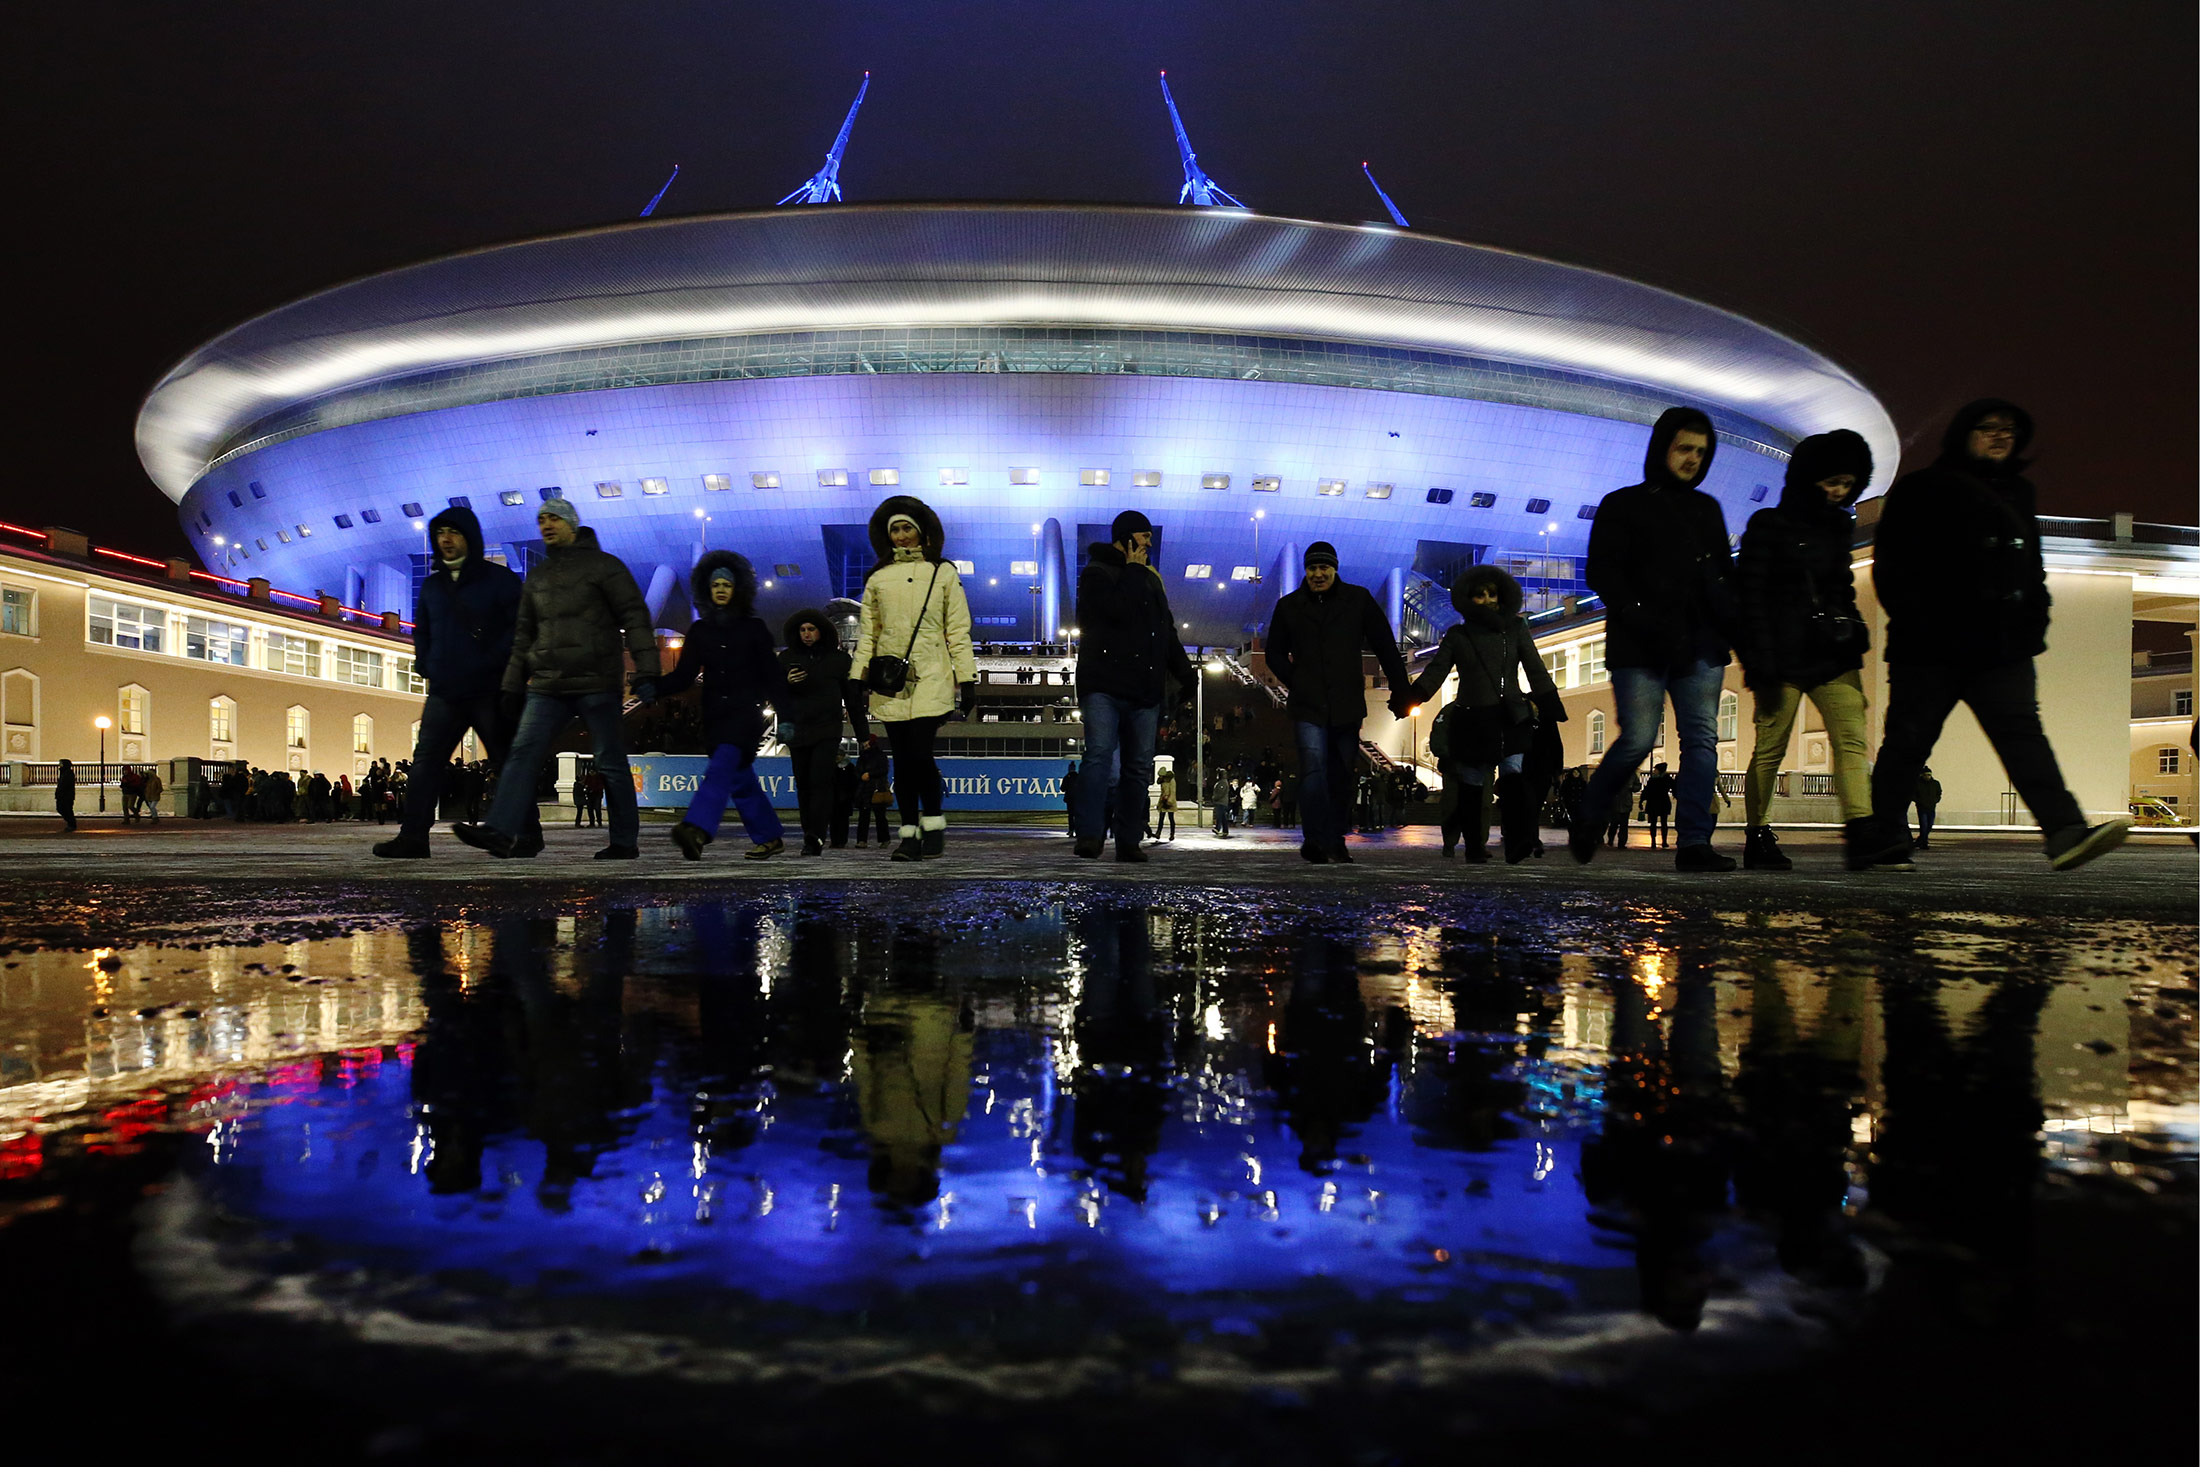 Locals gather by at Zenit Arena, a new stadium on Krestovsky Island in St Petersburg, as first spectators visit the stadium. Almost 10, 000 people test the stadium's readiness to host 2017 FIFA Confederations Cup and 2018 FIFA World Cup matches.
